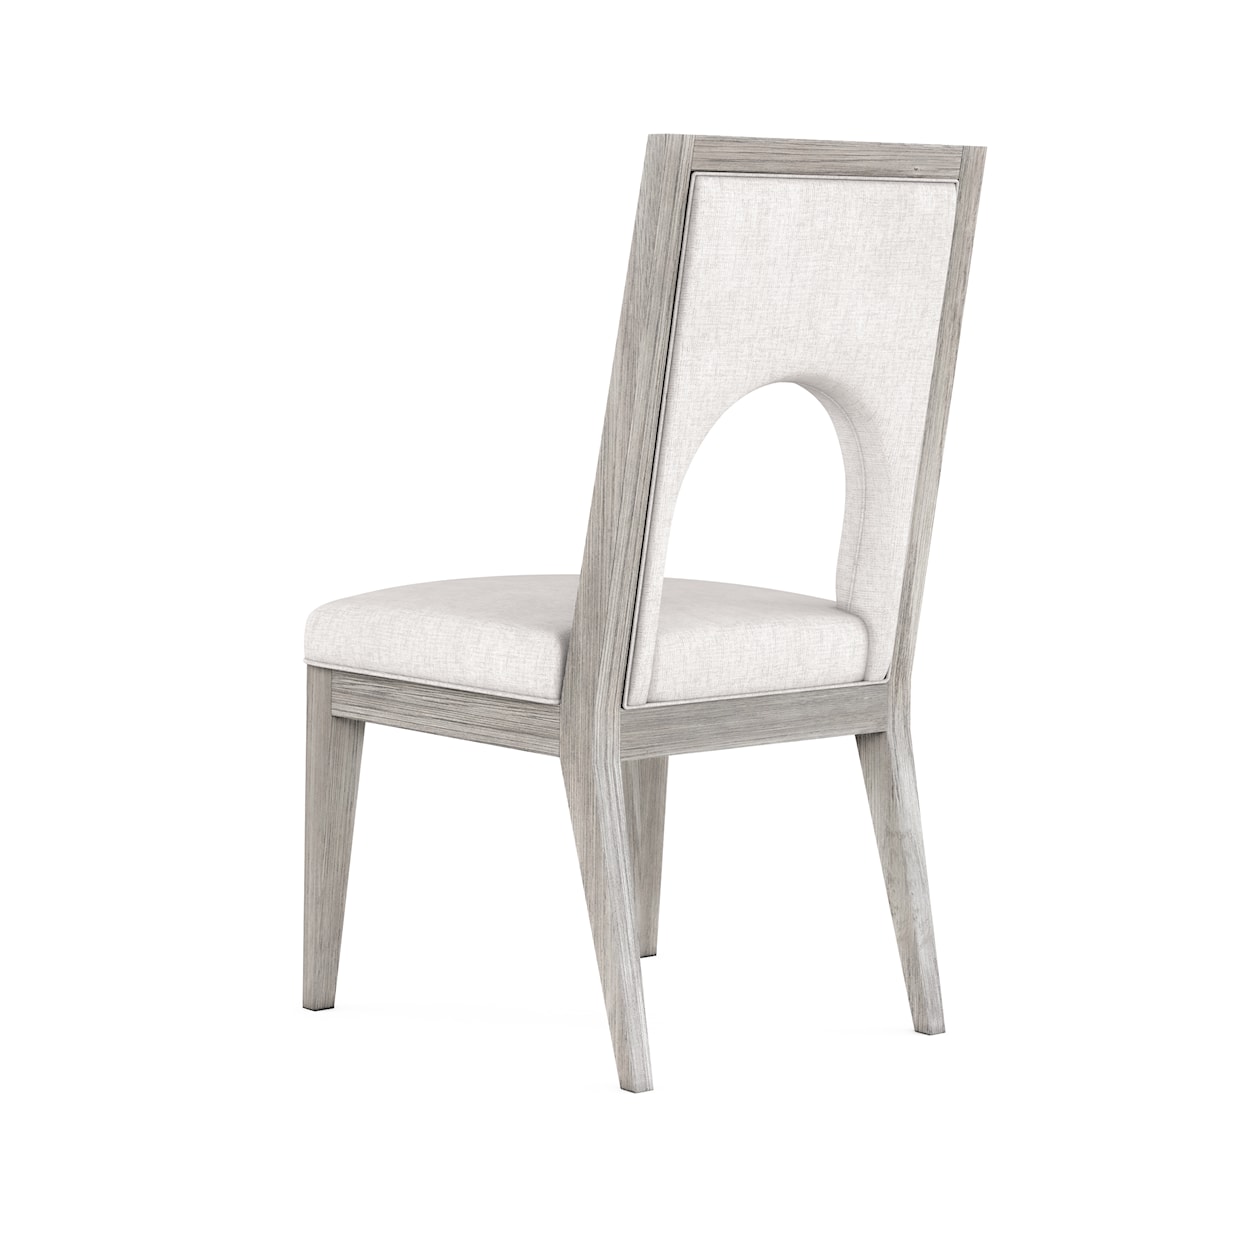 A.R.T. Furniture Inc Vault Upholstered Side Chair